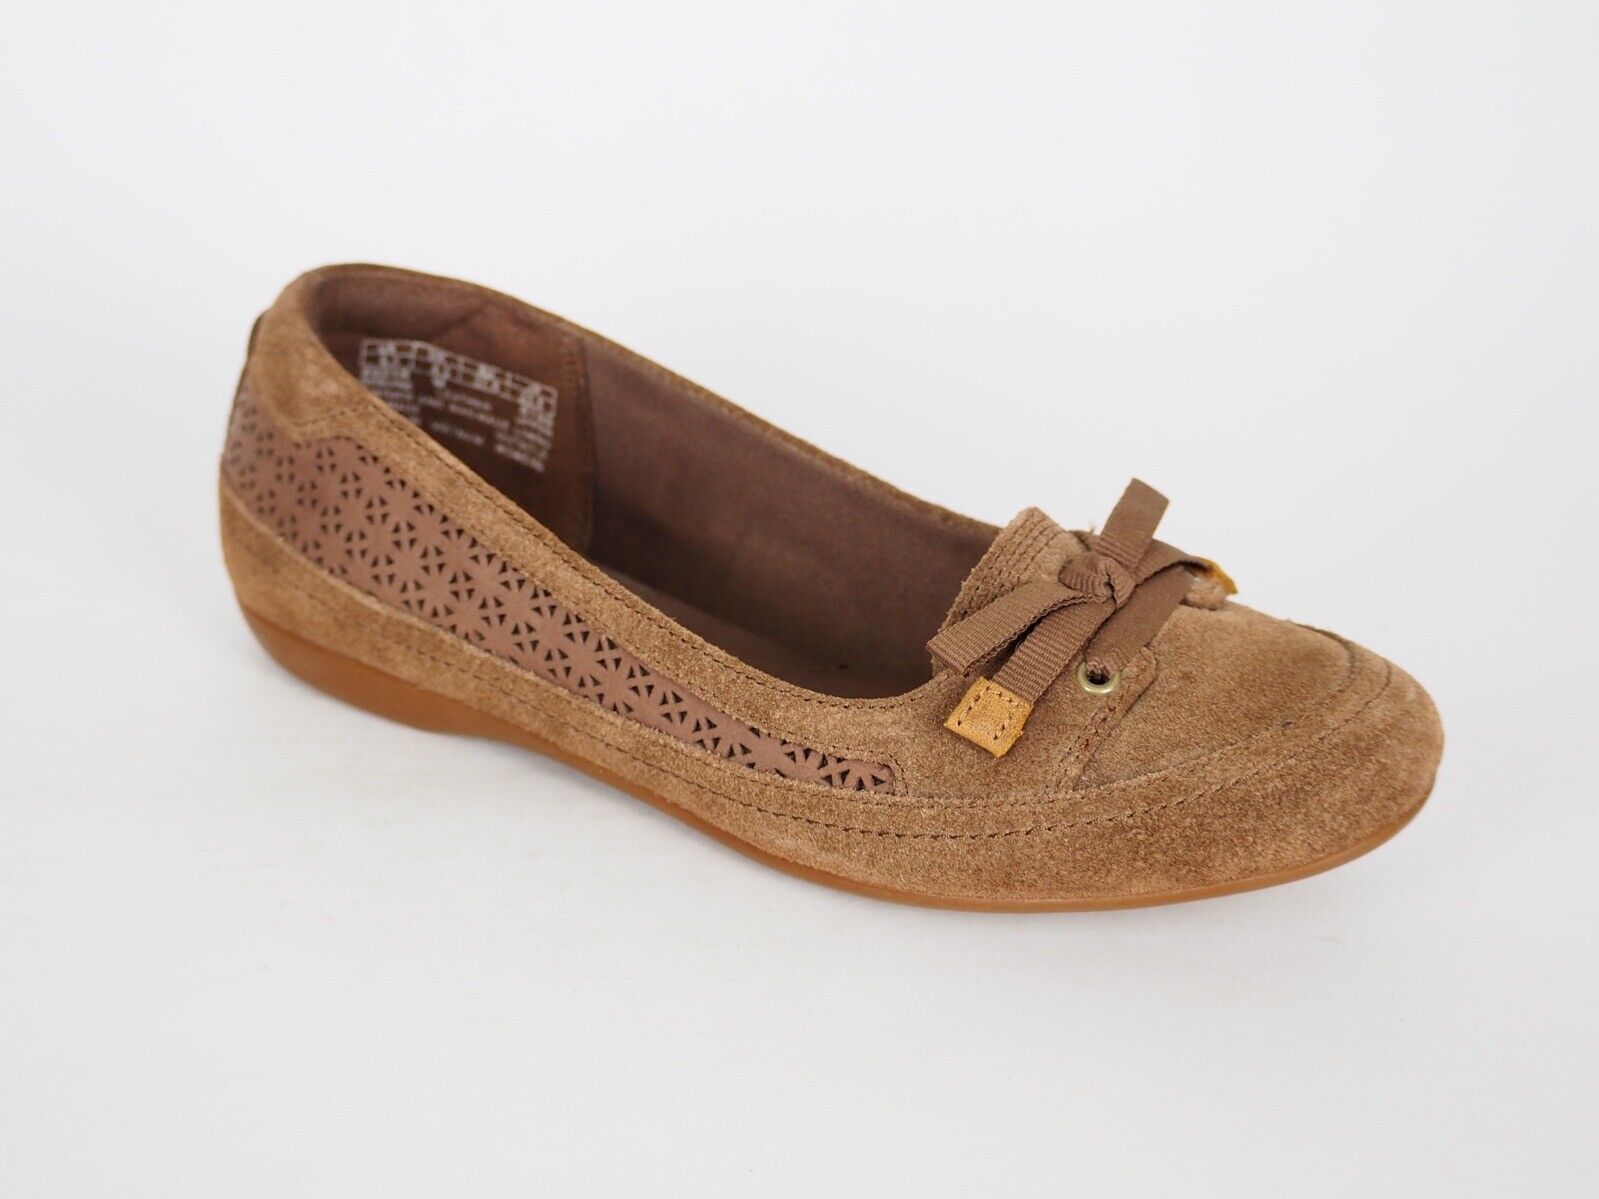 Womens Timberland Falmouth 8021R Brown Suede Slip On Ballerina Shoes UK 4.5 - London Top Style